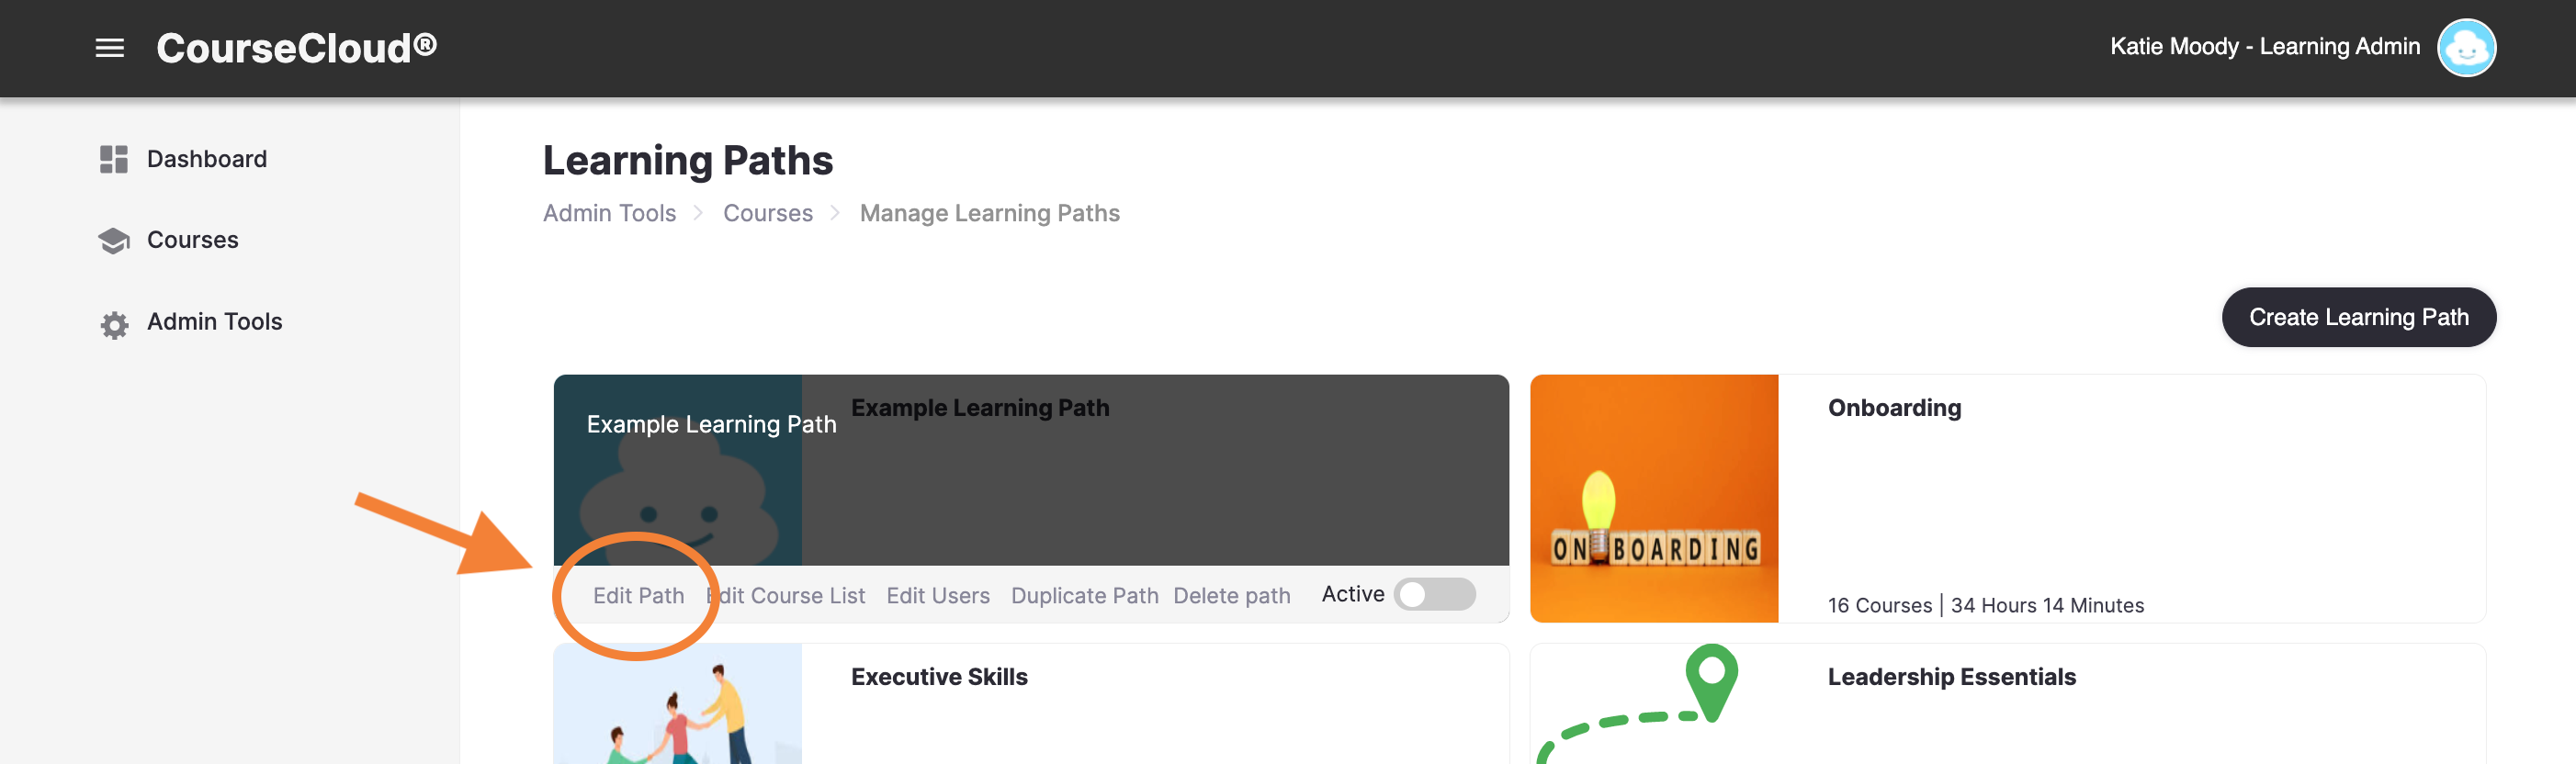 7_-_The_Learning_Paths_page__with_an_Edit_Path_link_indicated_II.png